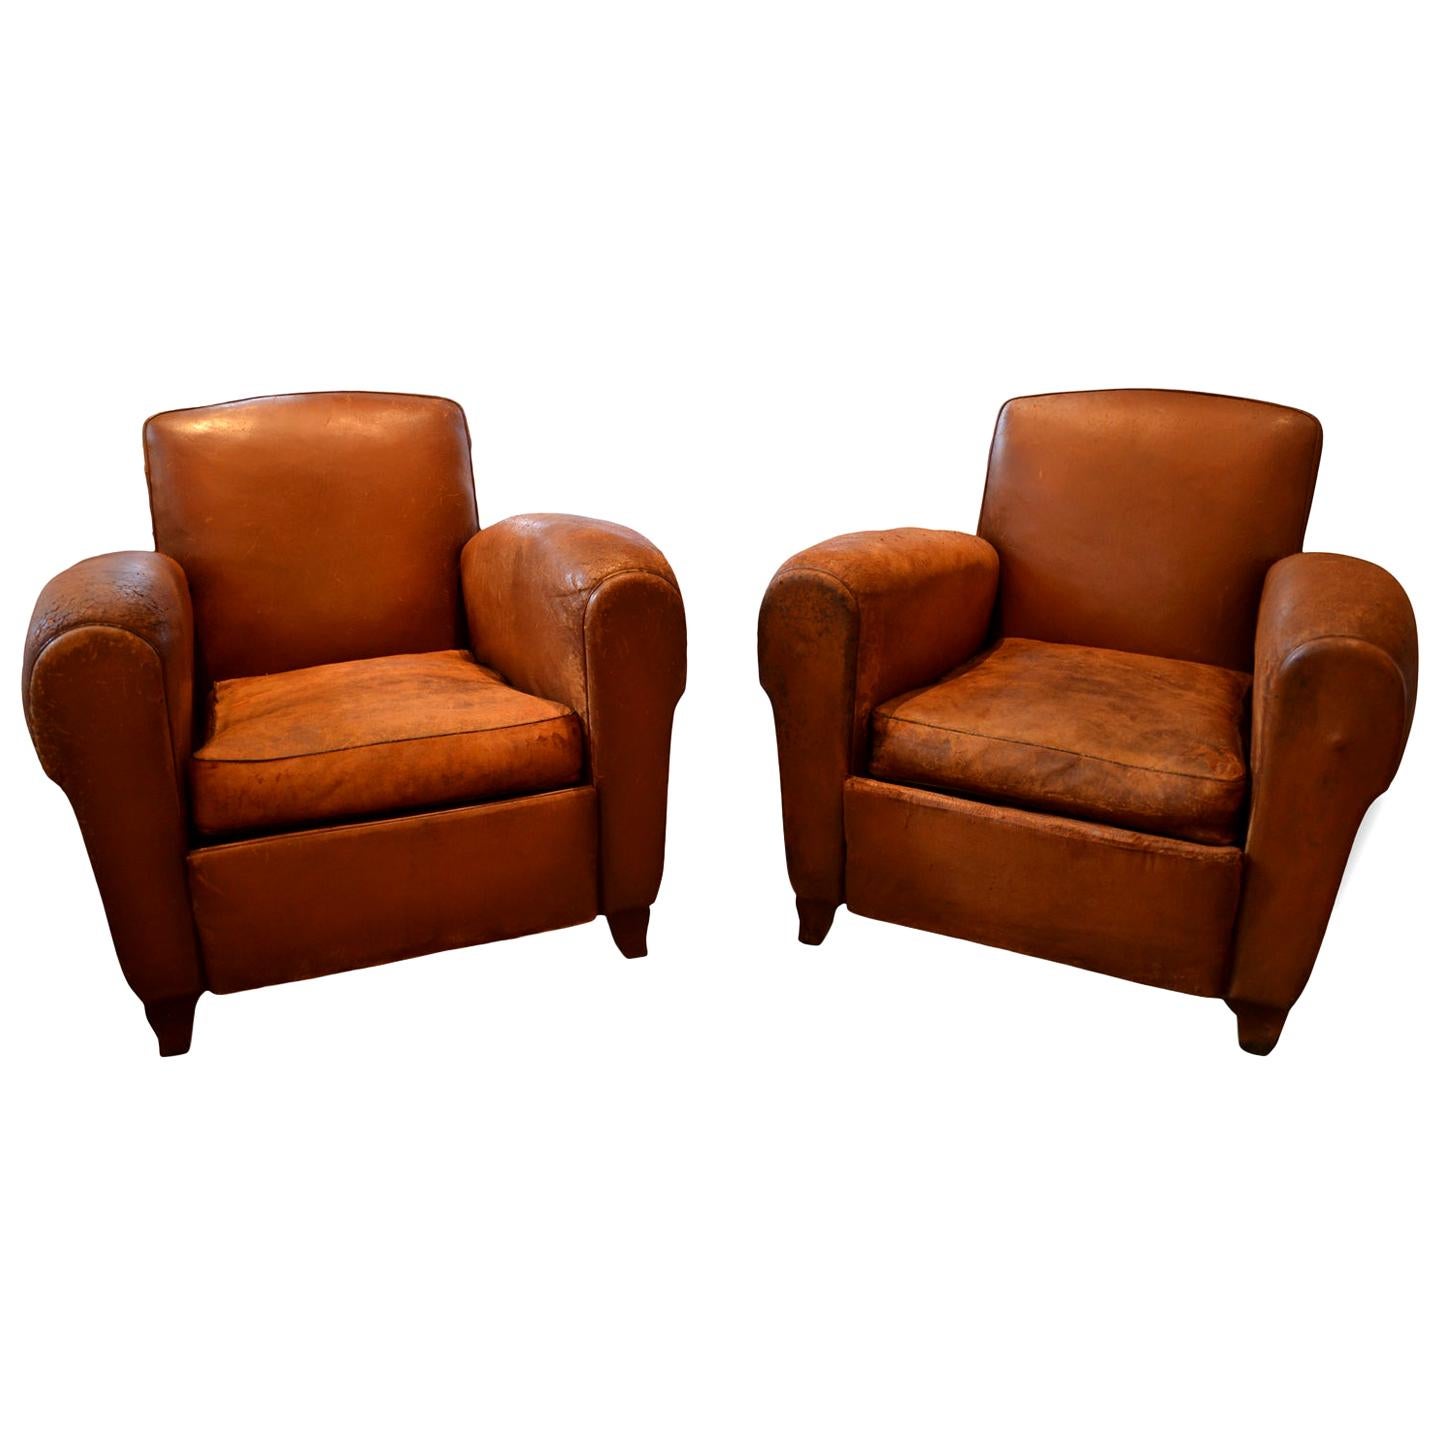 Vintage French 1930s Leather Club Chairs